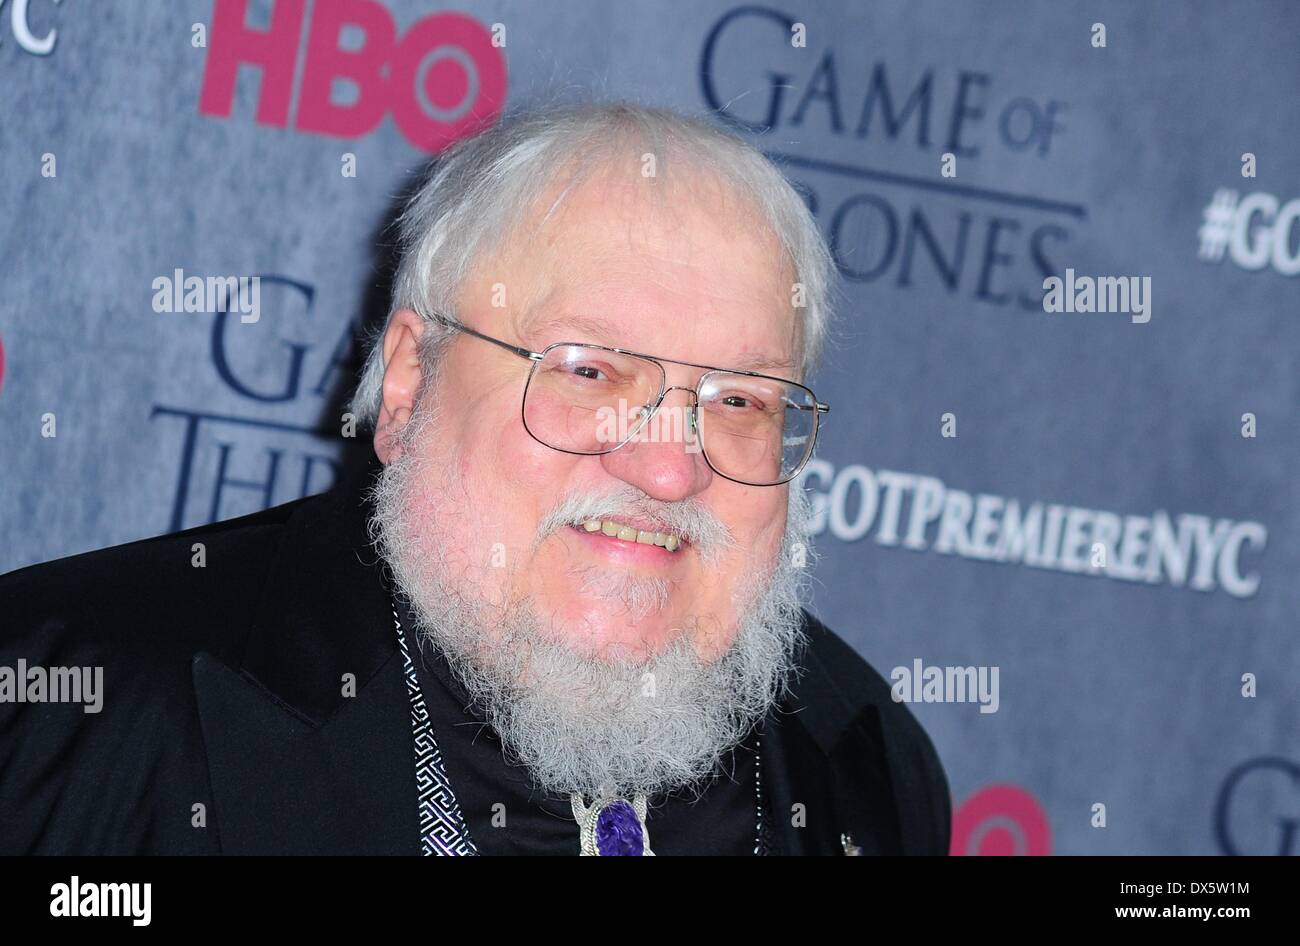 New York, NY, USA. 18th Mar, 2014. George R.R. Martin at arrivals for HBO's GAME OF THRONES Fourth Season Premiere, Avery Fisher Hall at Lincoln Center, New York, NY March 18, 2014. Credit:  Gregorio T. Binuya/Everett Collection/Alamy Live News Stock Photo